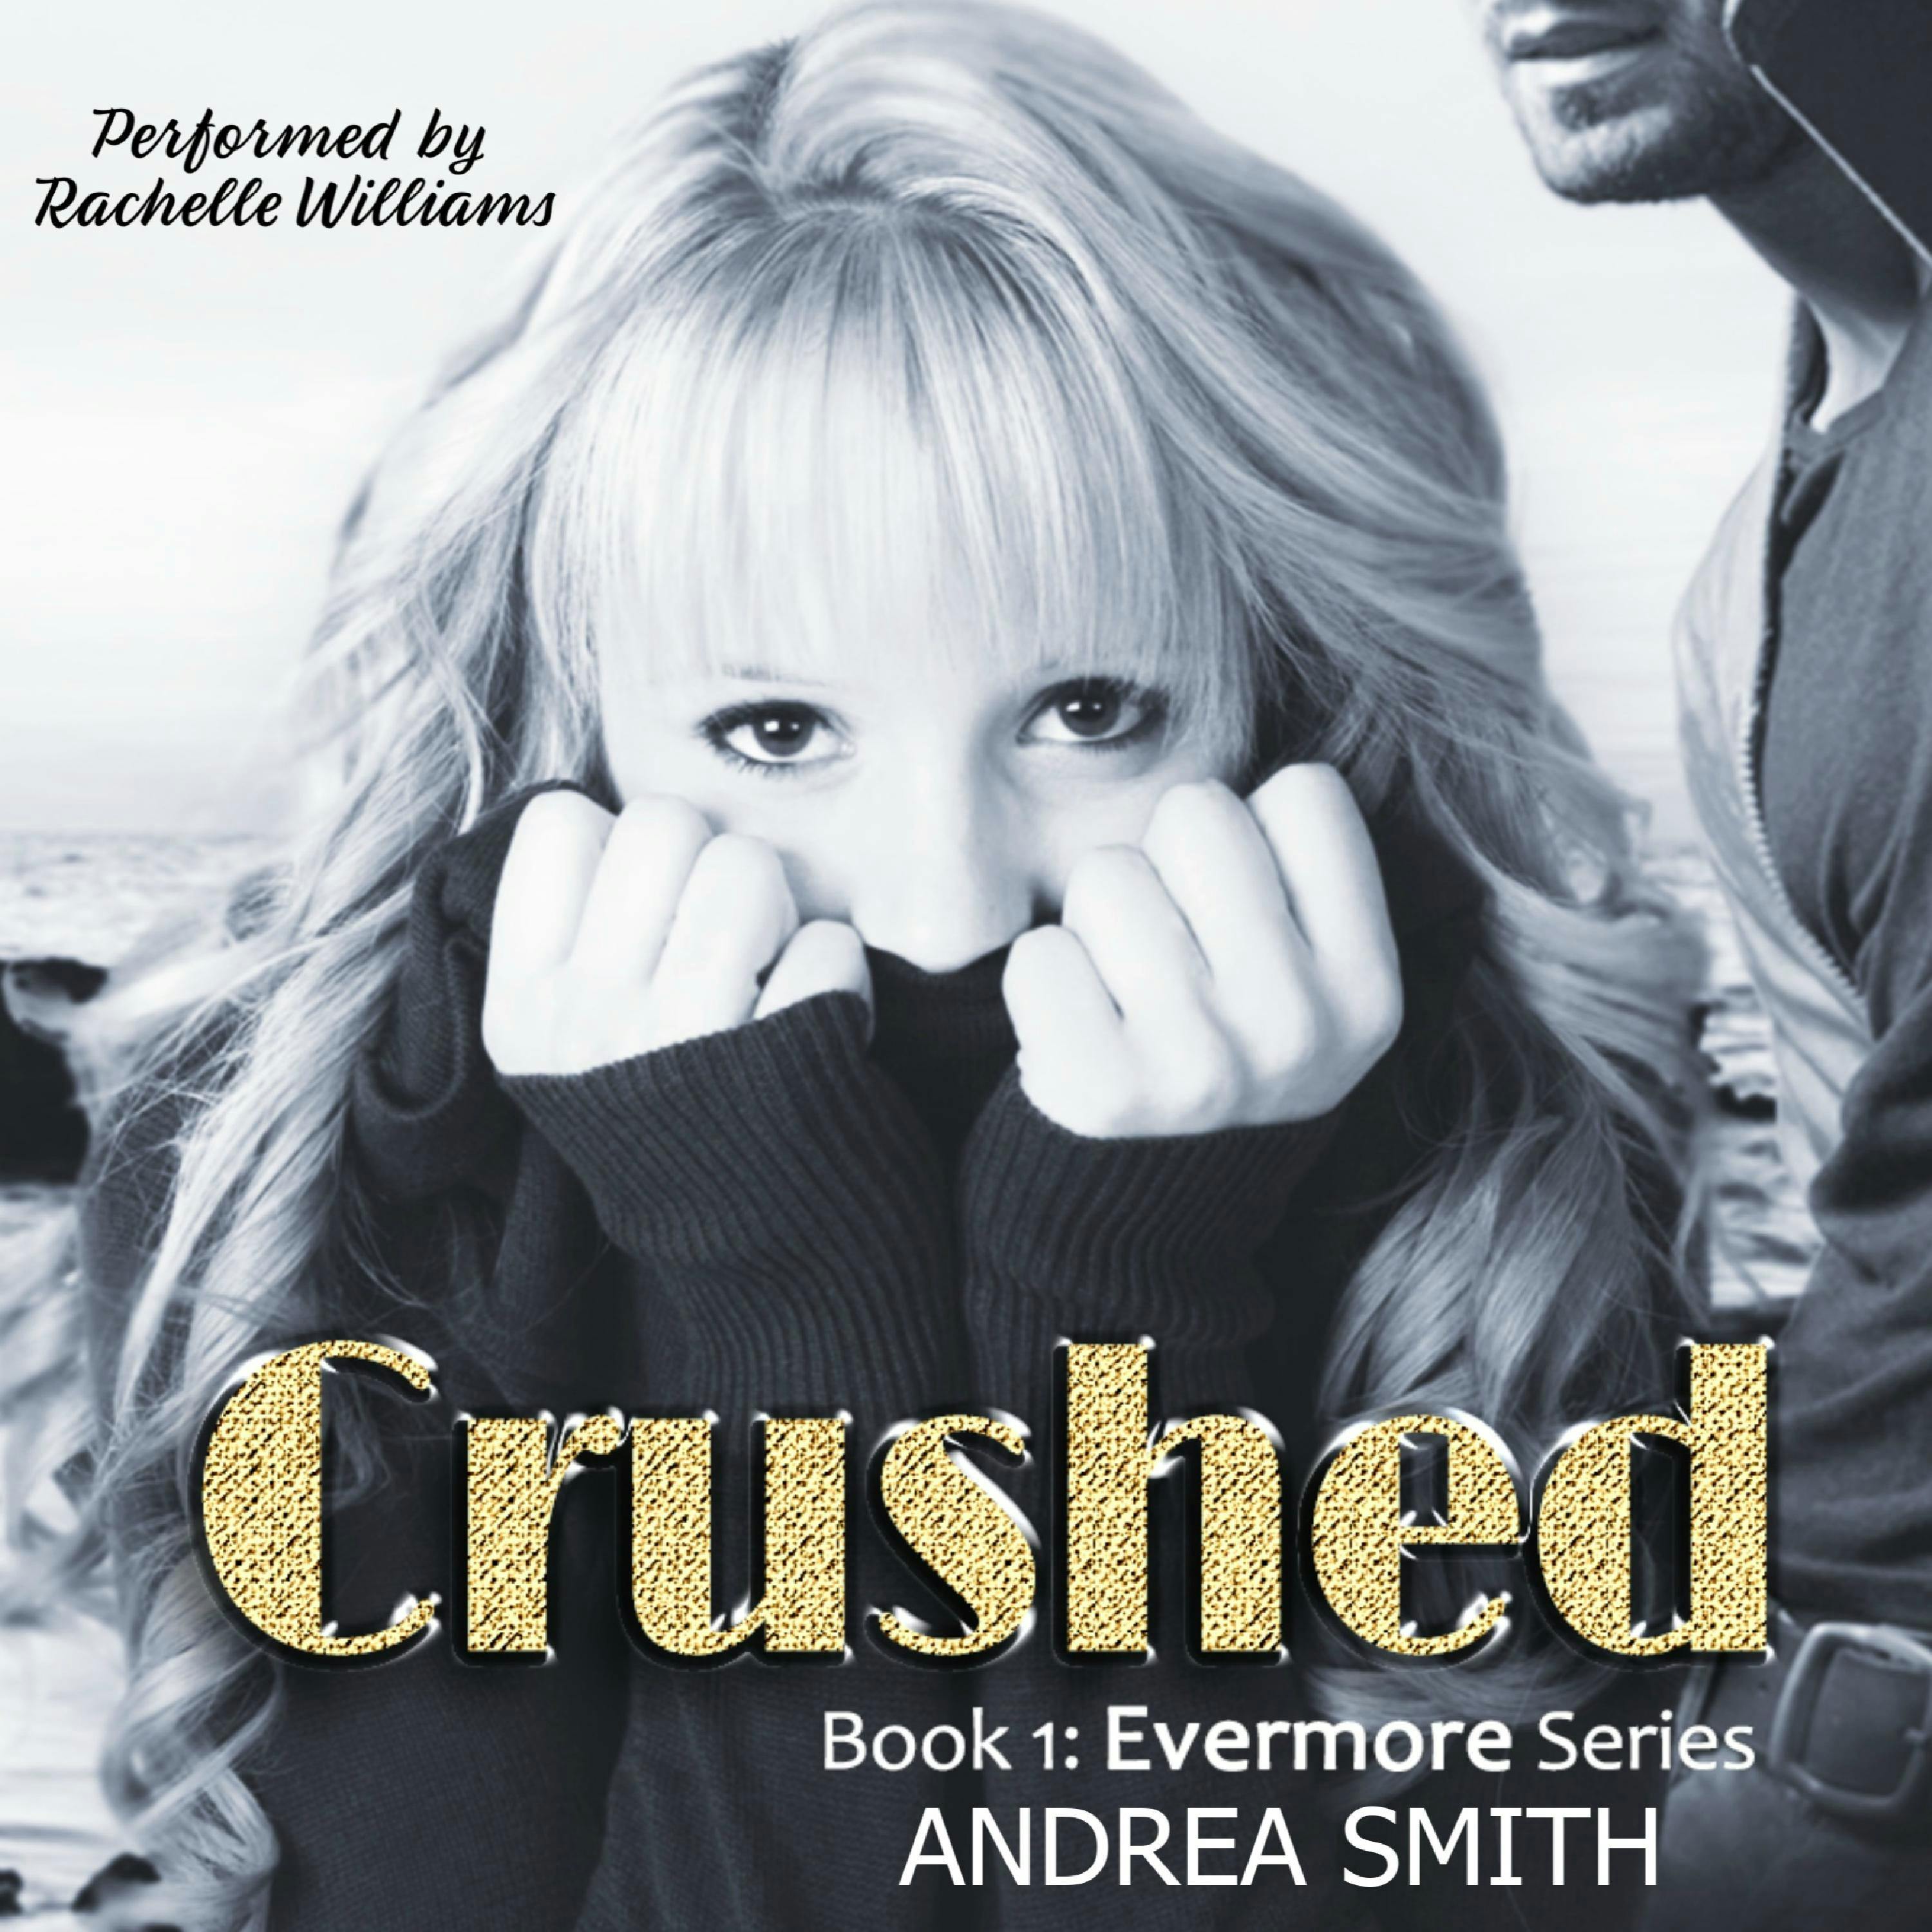 Crushed - Andrea Smith